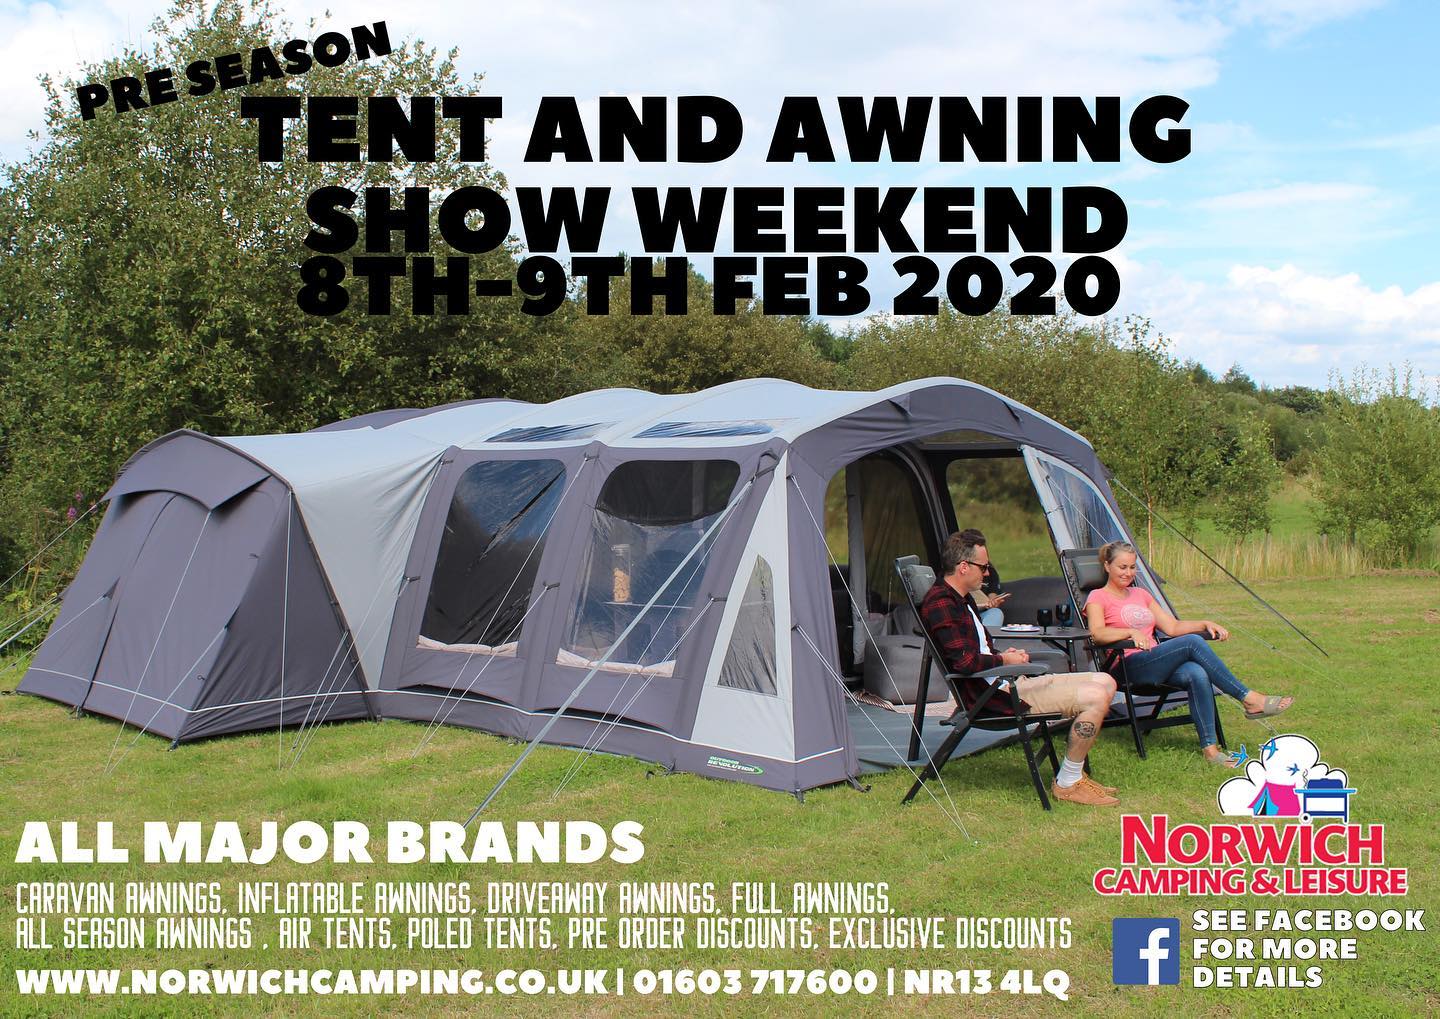 Pre Season tent & Awning Show Weekend, Norwich Camping & Leisure, 58 Yarmouth Road, Blofield, Norfolk, NR13 4LQ | This show weekend is back for 2020 and is the ideal time to grab a 2019 bargain or see what's new from leading brands for the New year. | Camping, Sale, Caravan, Awning, Camping Supplies, Cadac, Coleman, Kampa, Isabella, Outdoor revolution, Zempire